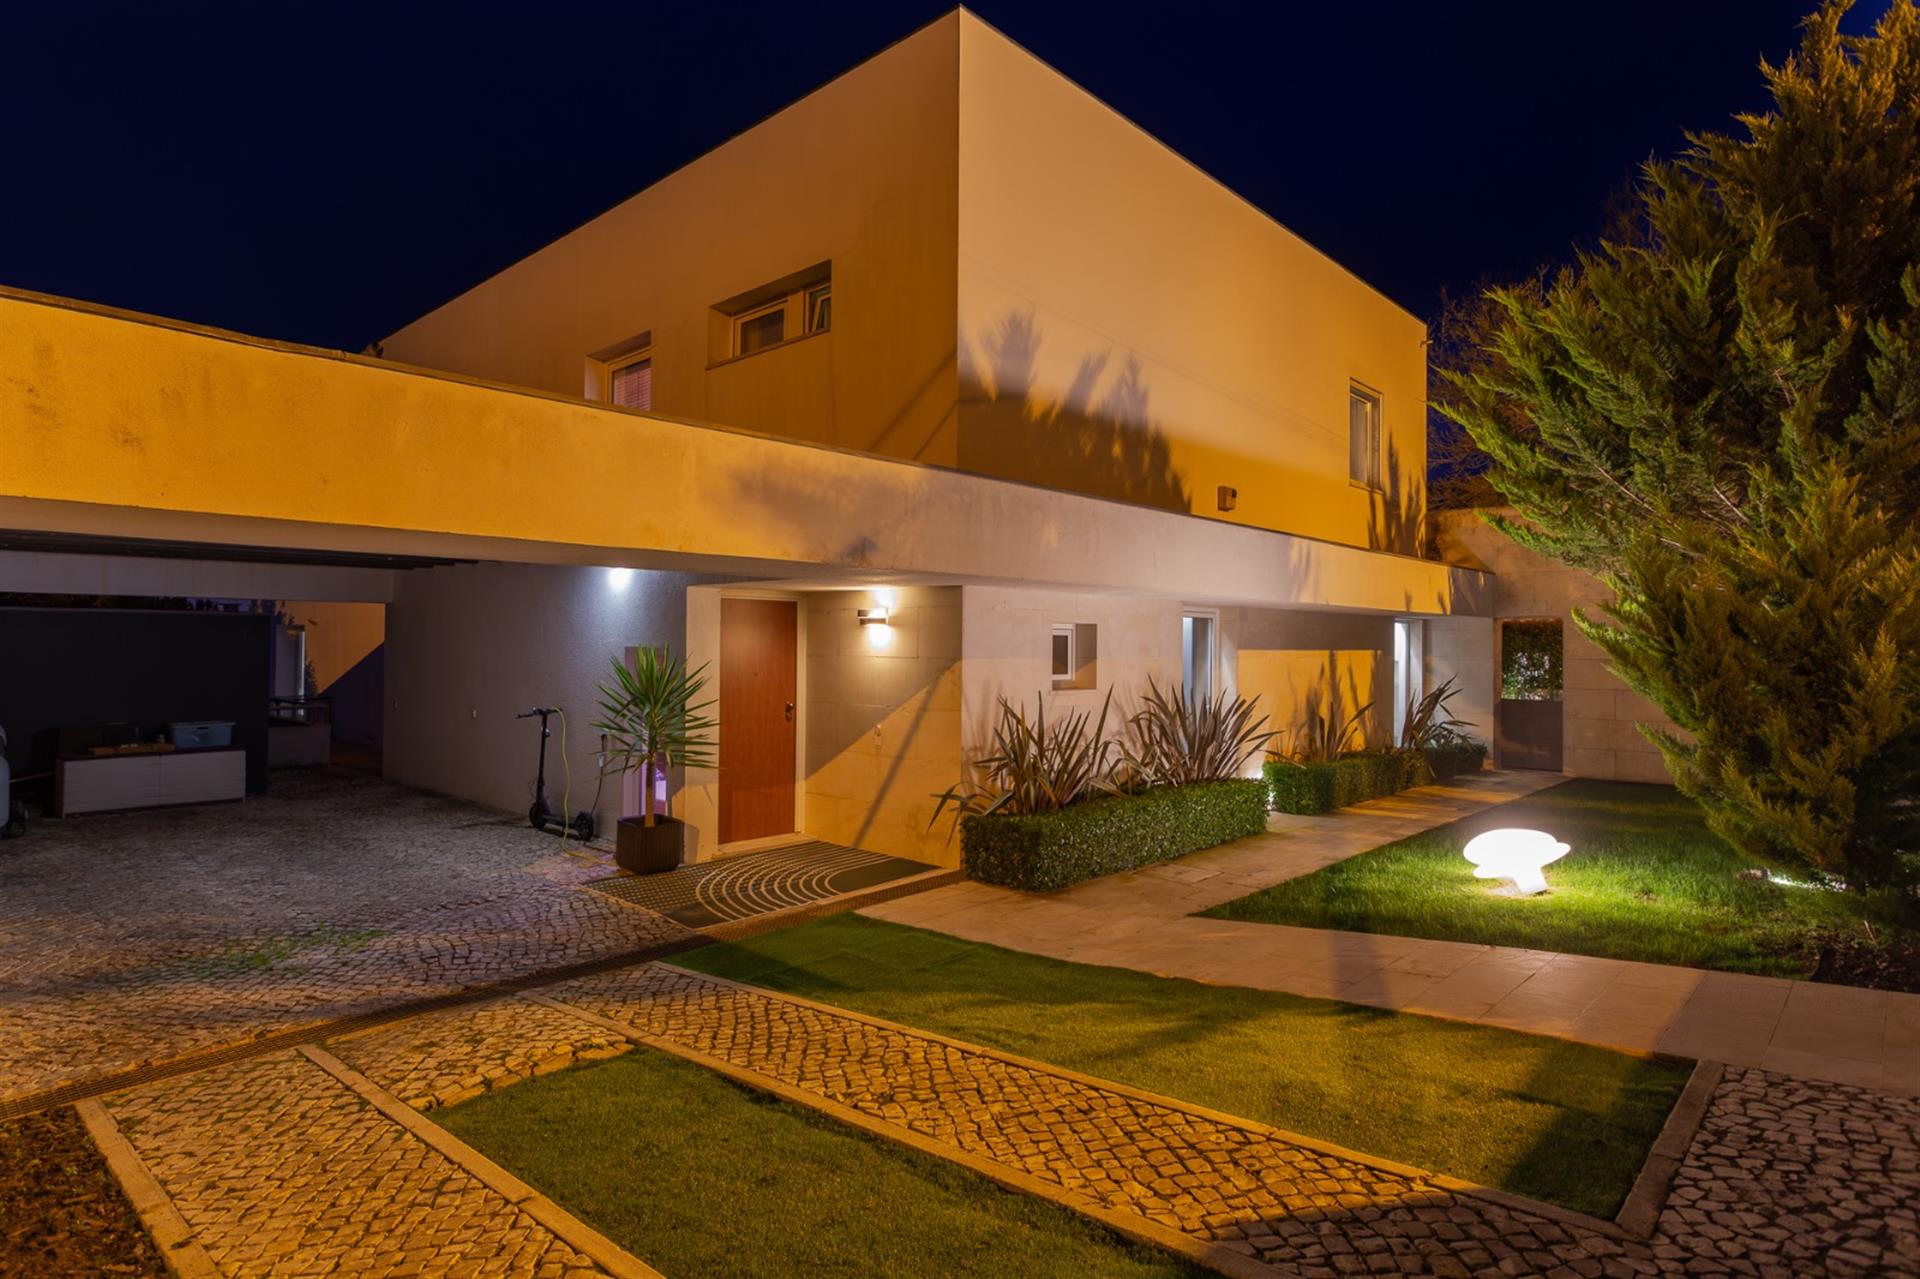 4 Bedroom House | Modern Lines | Garden | Luminous | To Live Indoors And Outside The Home | Paço De 